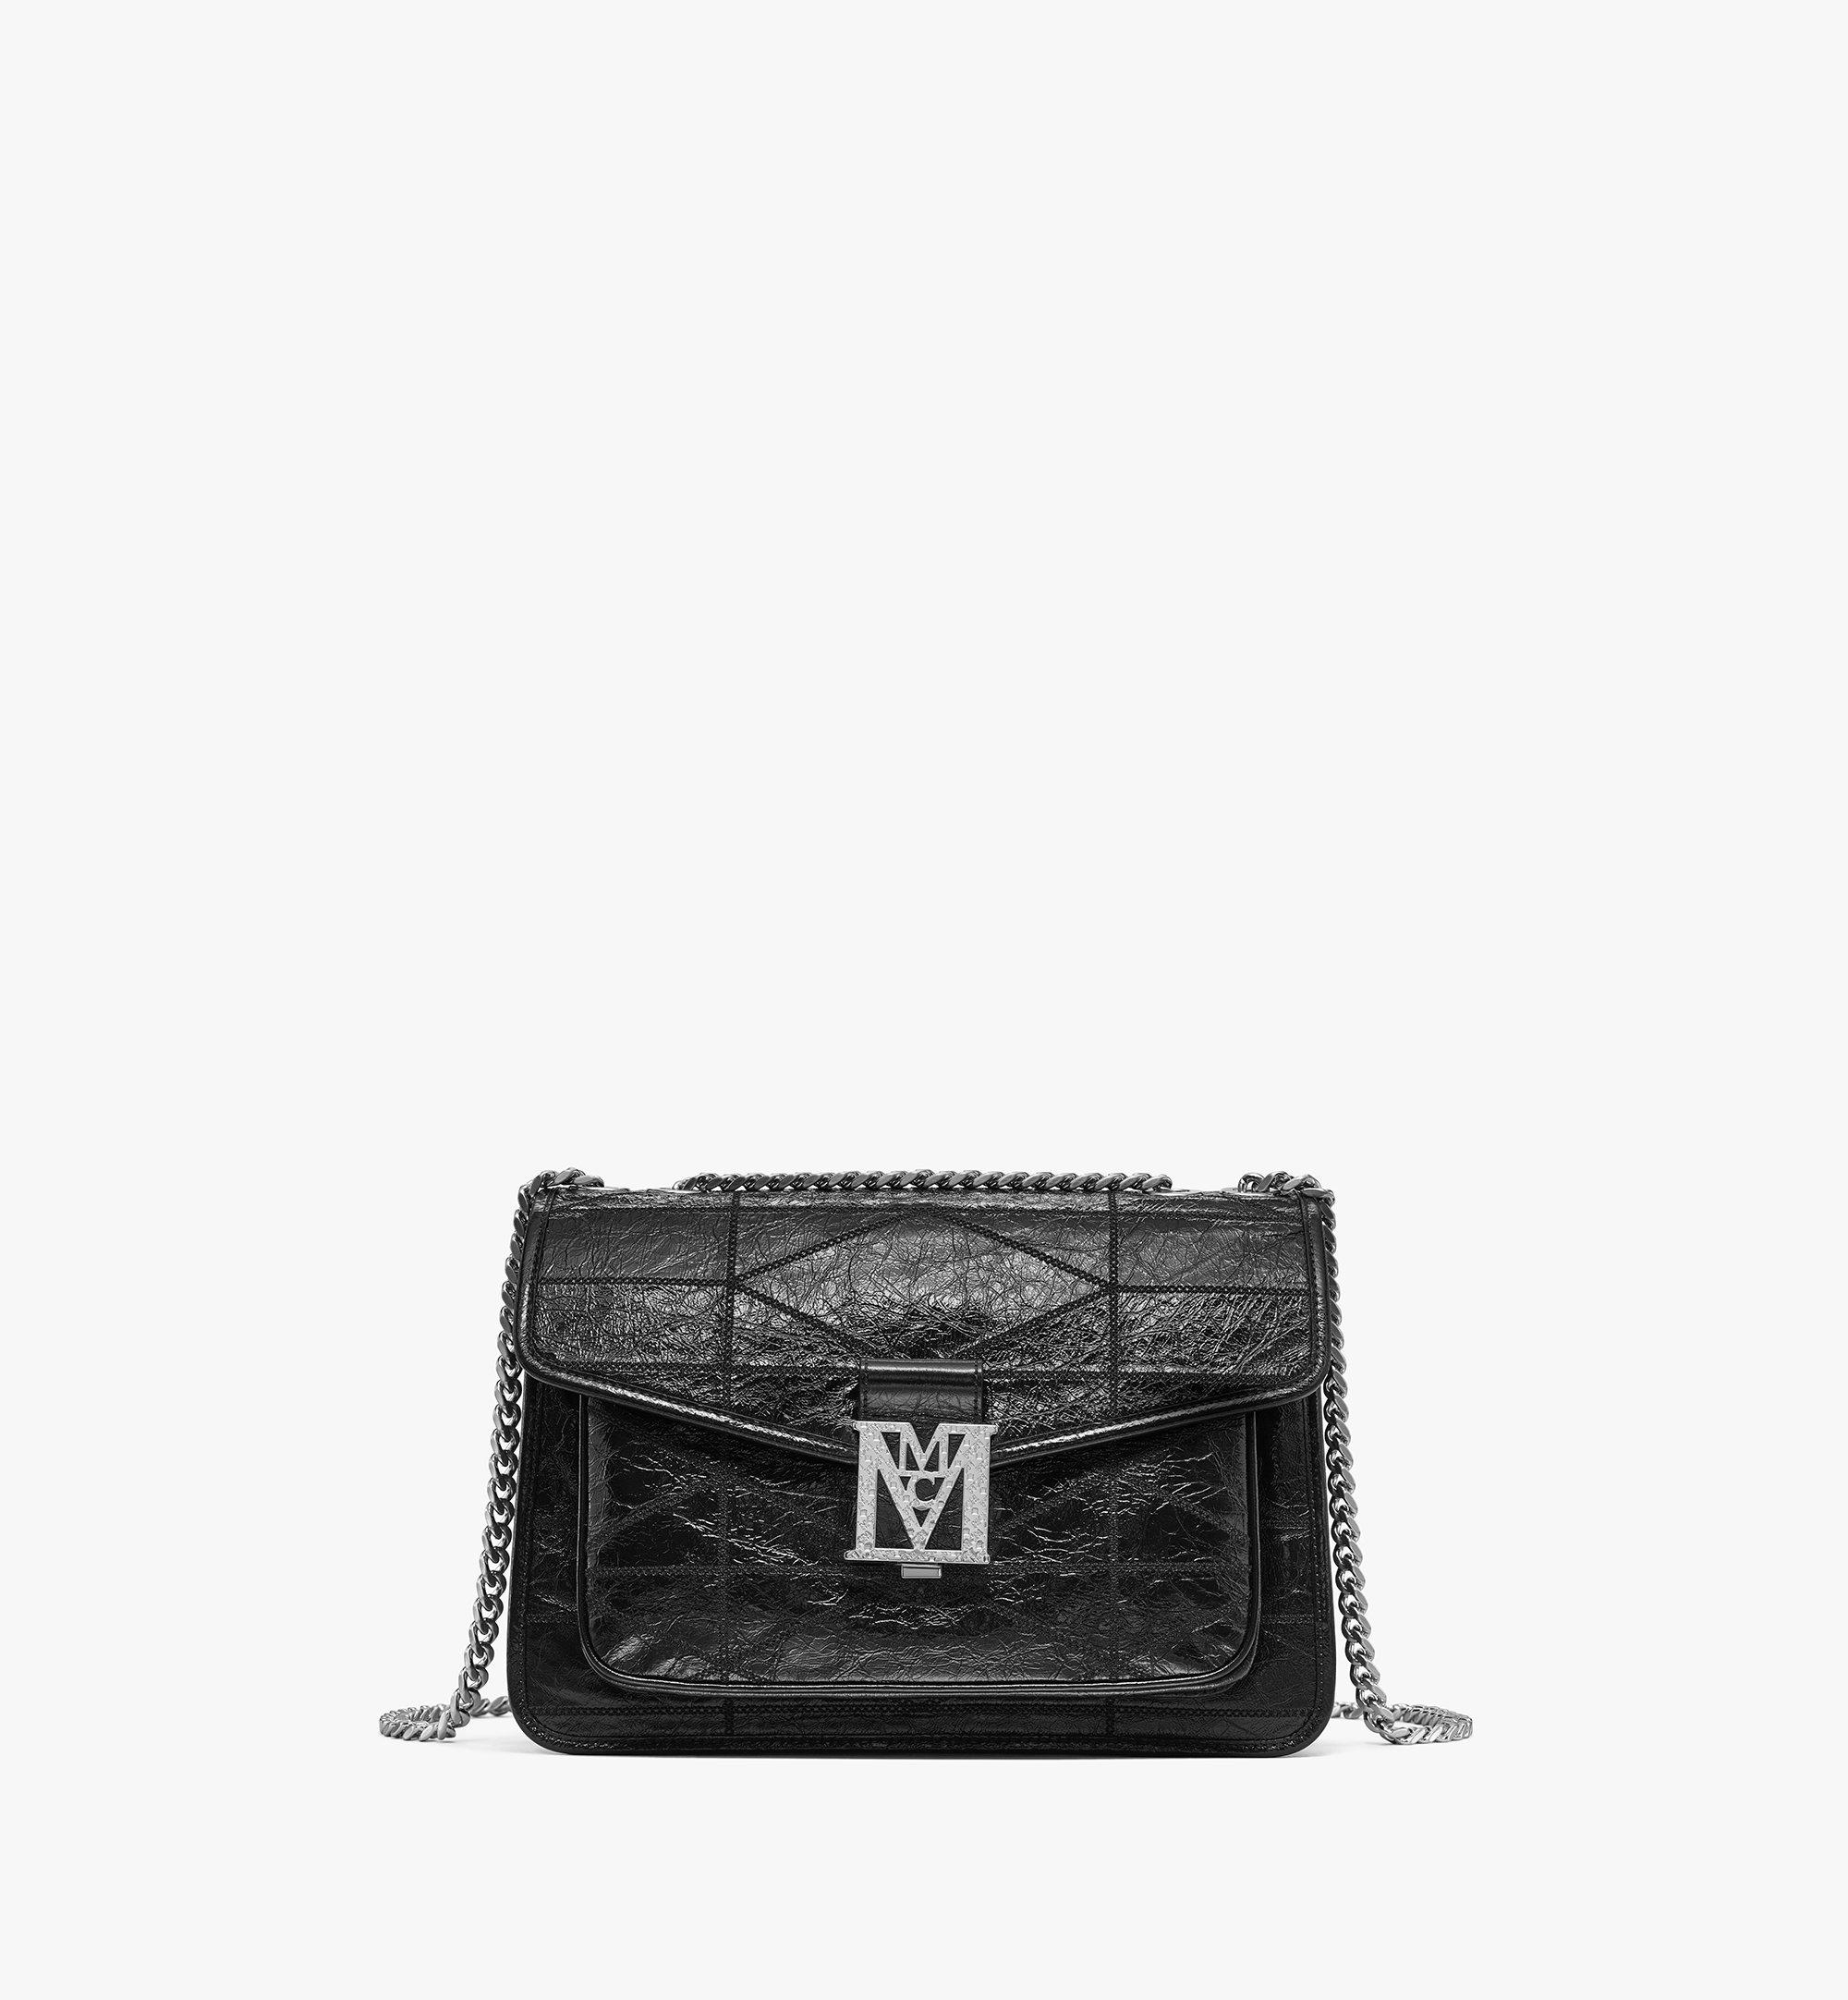 MCM Travia Quilted Shoulder Bag in Crushed Leather Black MWSBSLM05BK001 Alternate View 1